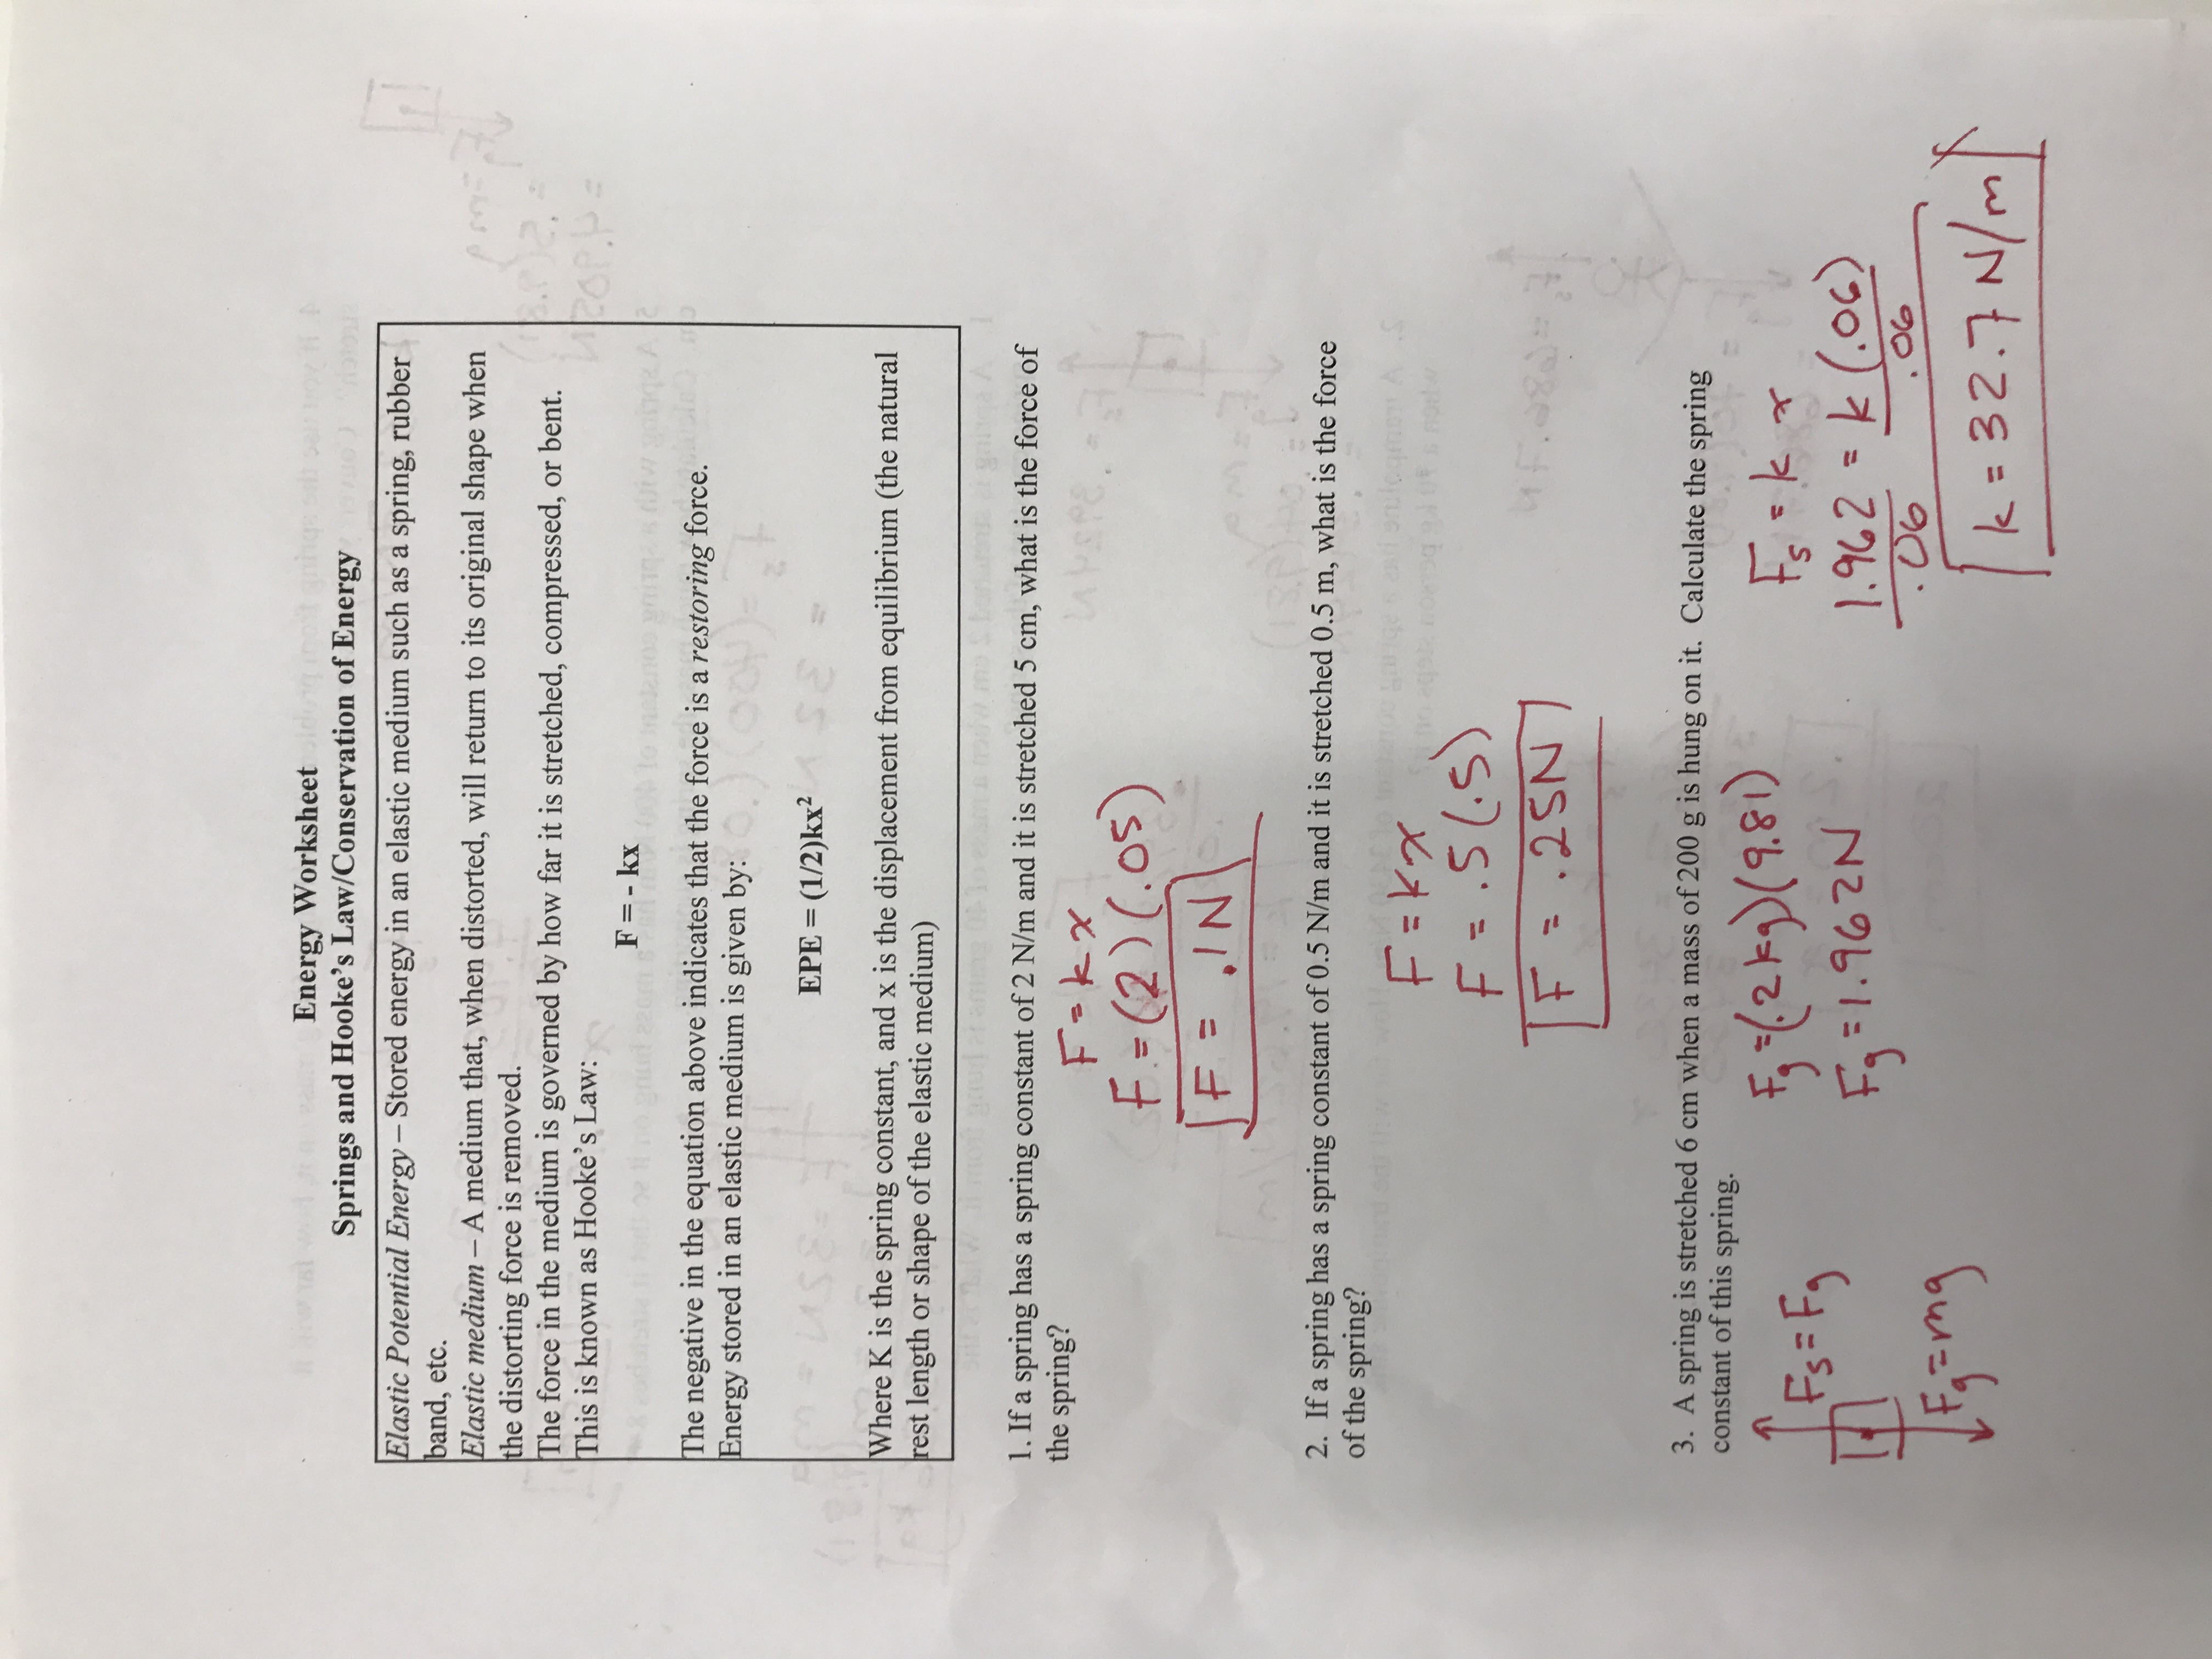 Work, Power, Energy - Physics With Regard To Conservation Of Energy Worksheet